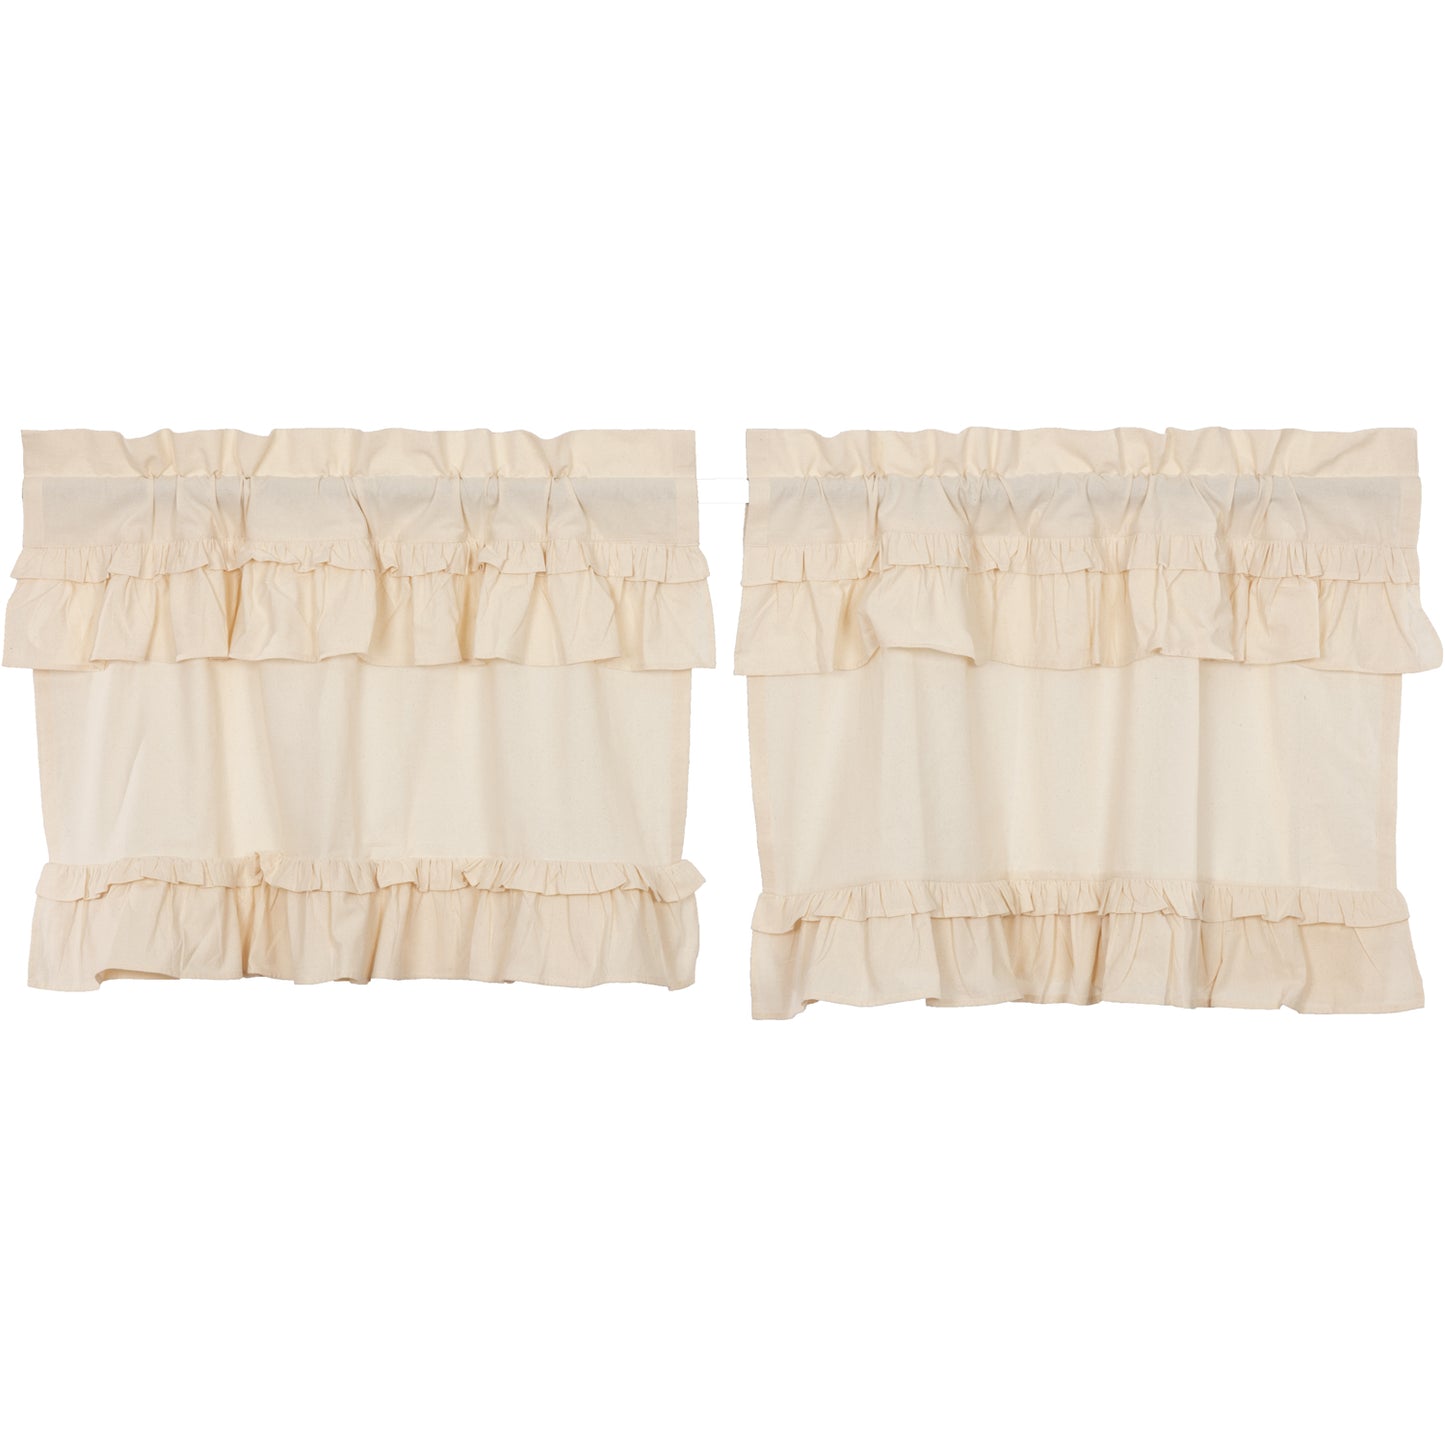 51989-Muslin-Ruffled-Unbleached-Natural-Tier-Set-of-2-L24xW36-image-6